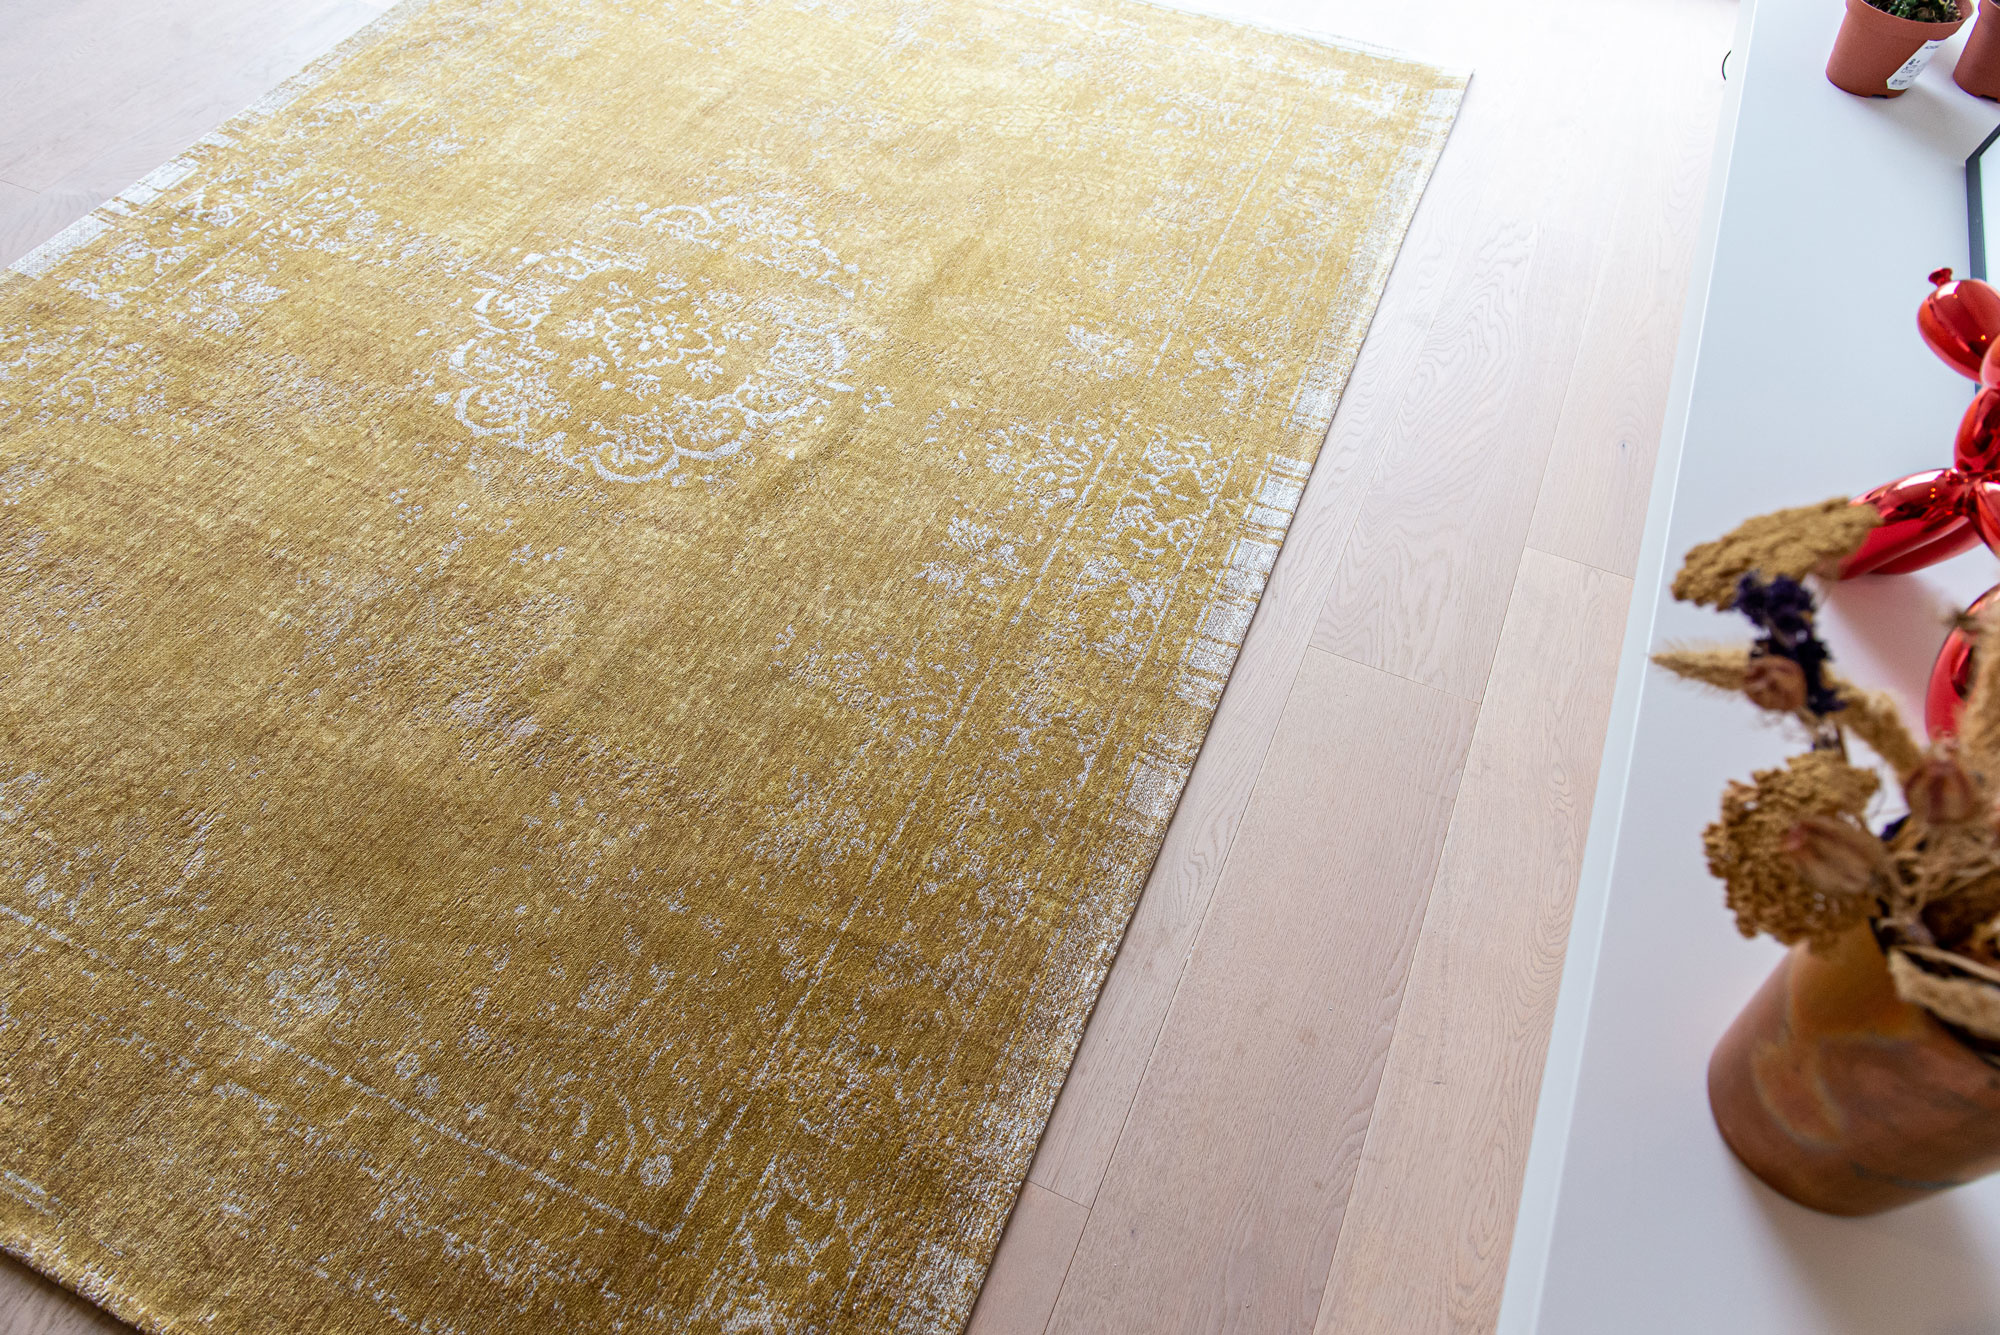 Spring Moss 9145 Rug ☞ Size: 240 x 340 cm